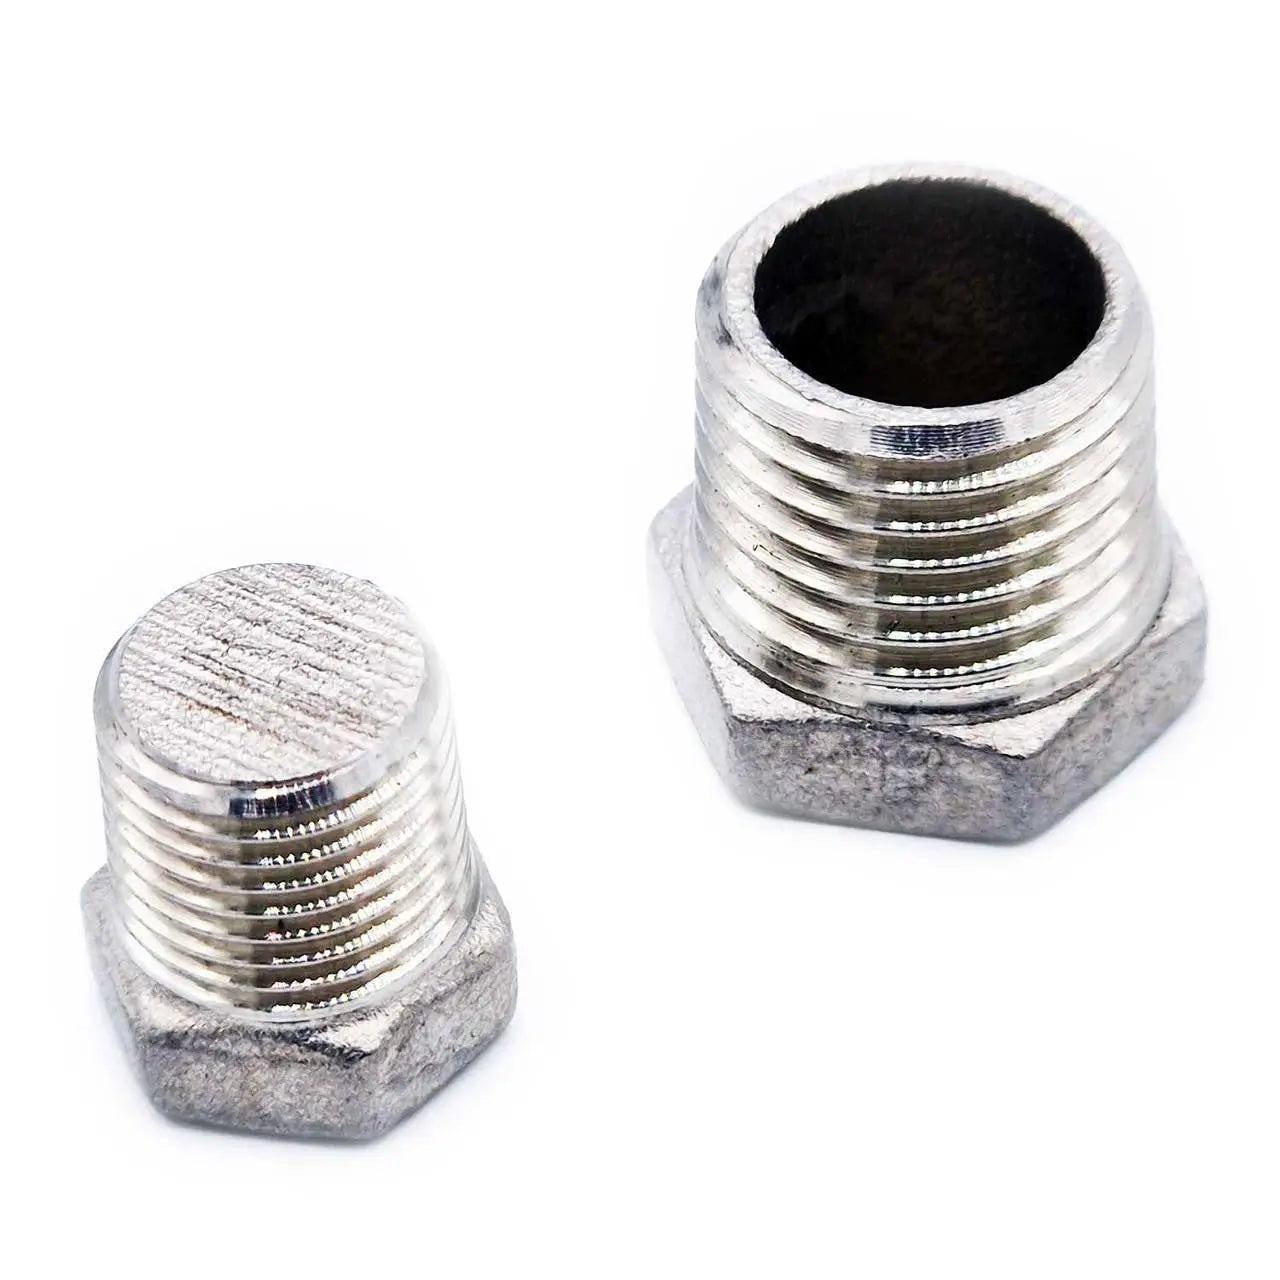 1/8 1/4 BSP Male Hex Plug 316 Stainless Steel Blanking Plugs and Caps